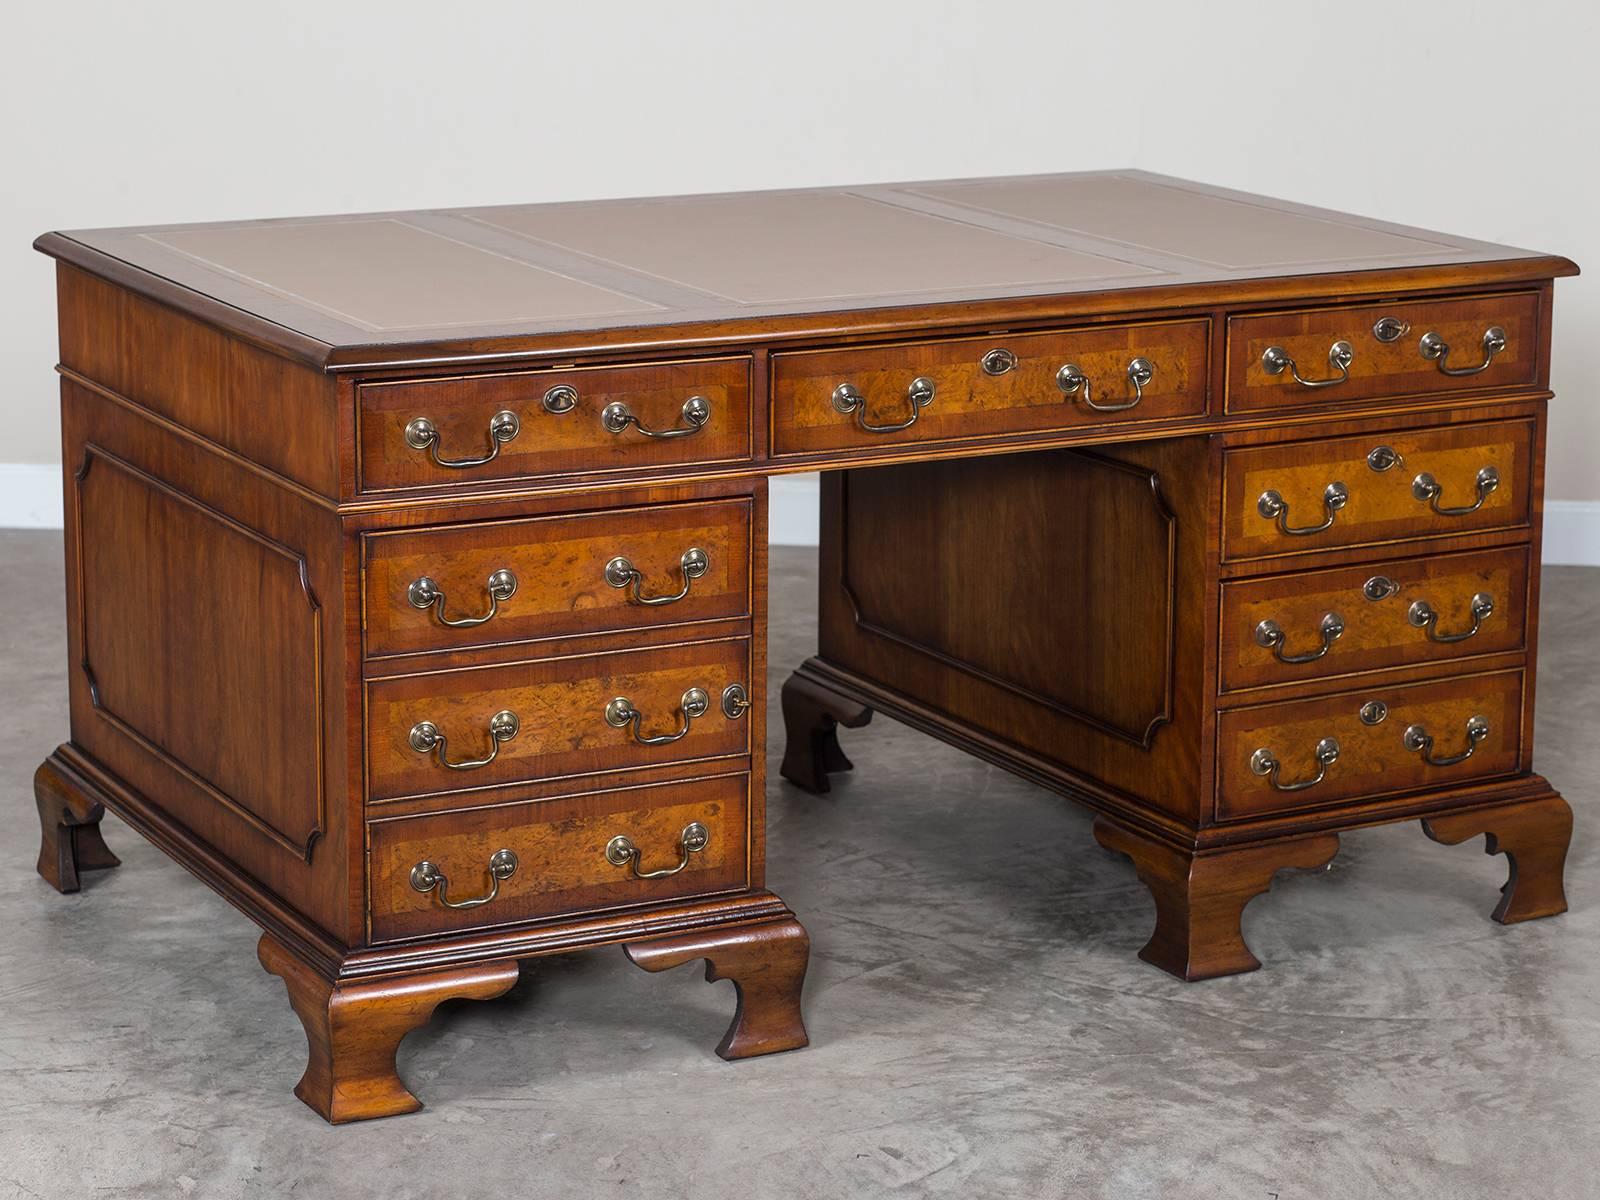 George III Style Burl Walnut Partners Desk Handmade in England In Excellent Condition For Sale In Houston, TX